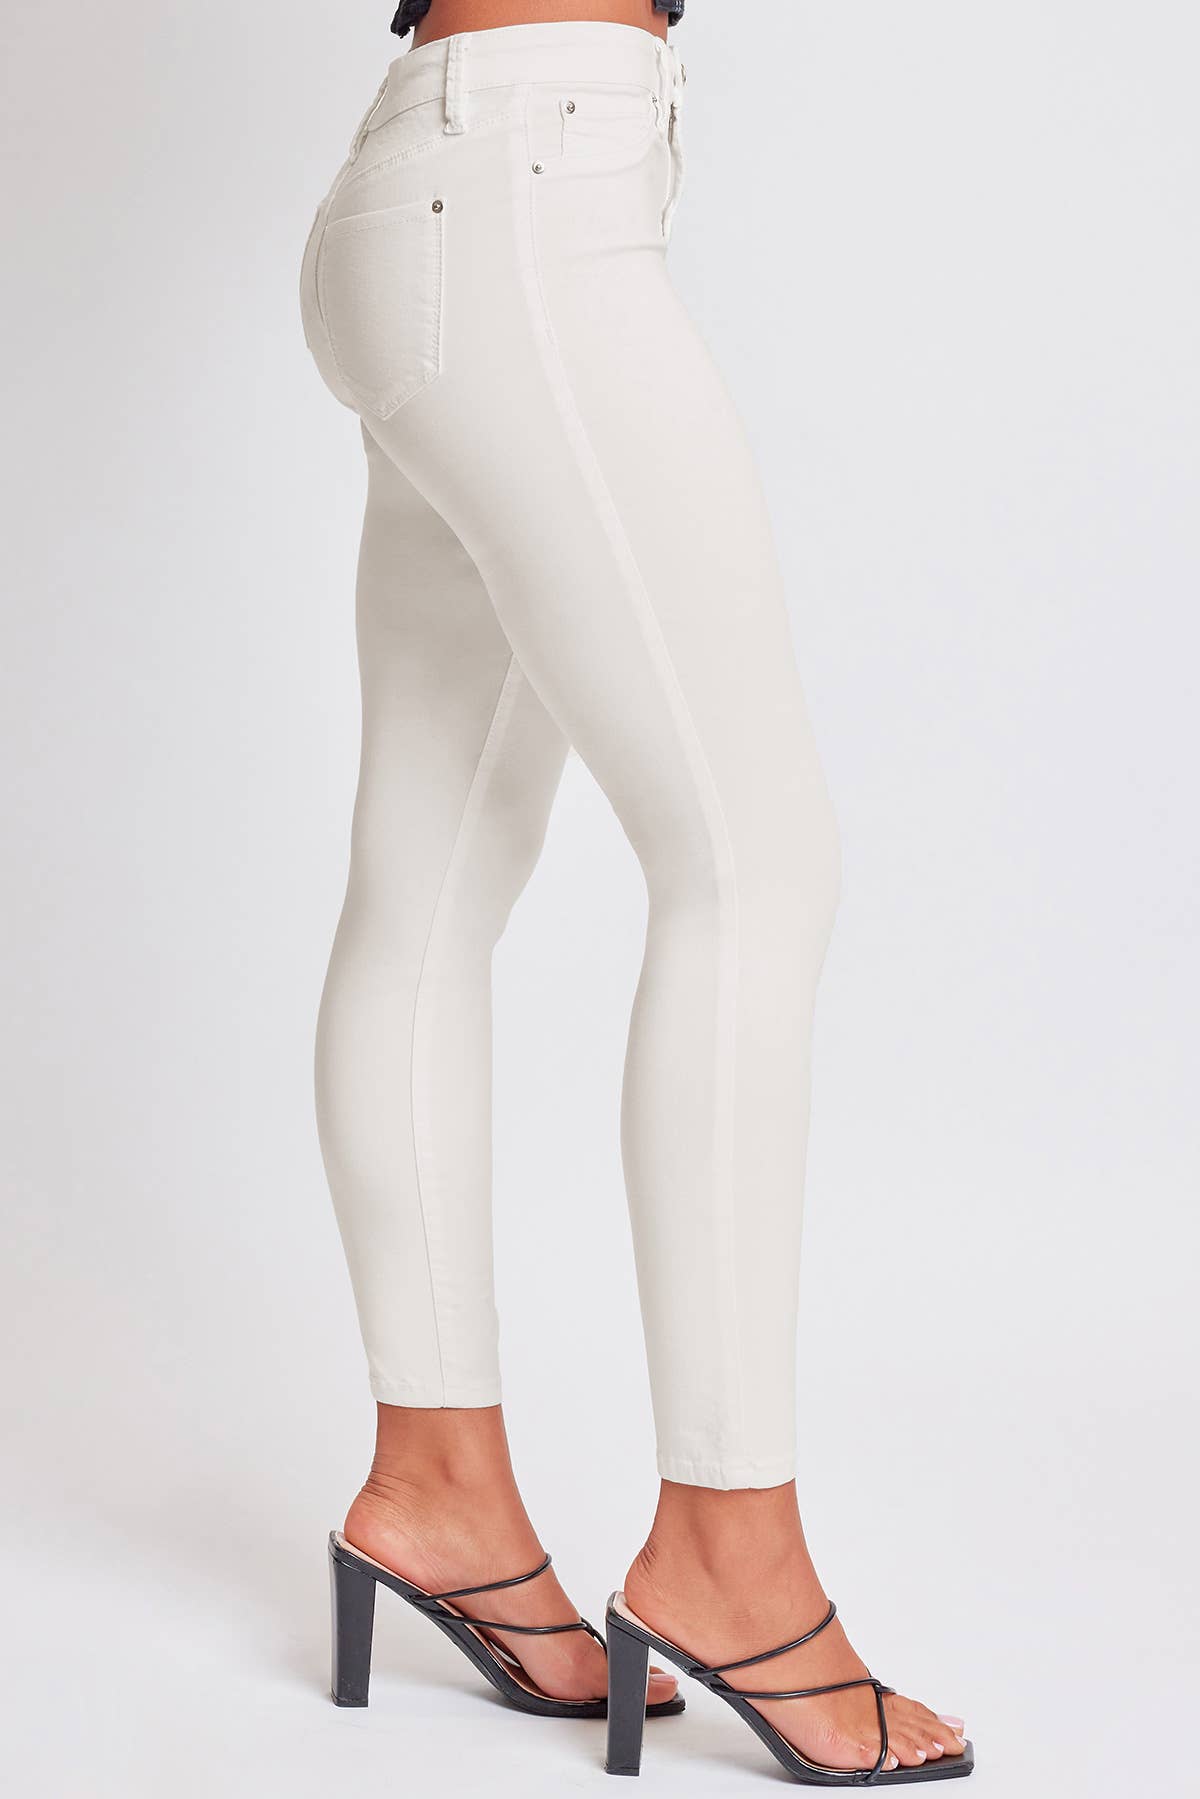 Hyperstretch Mid-Rise Skinny Jean